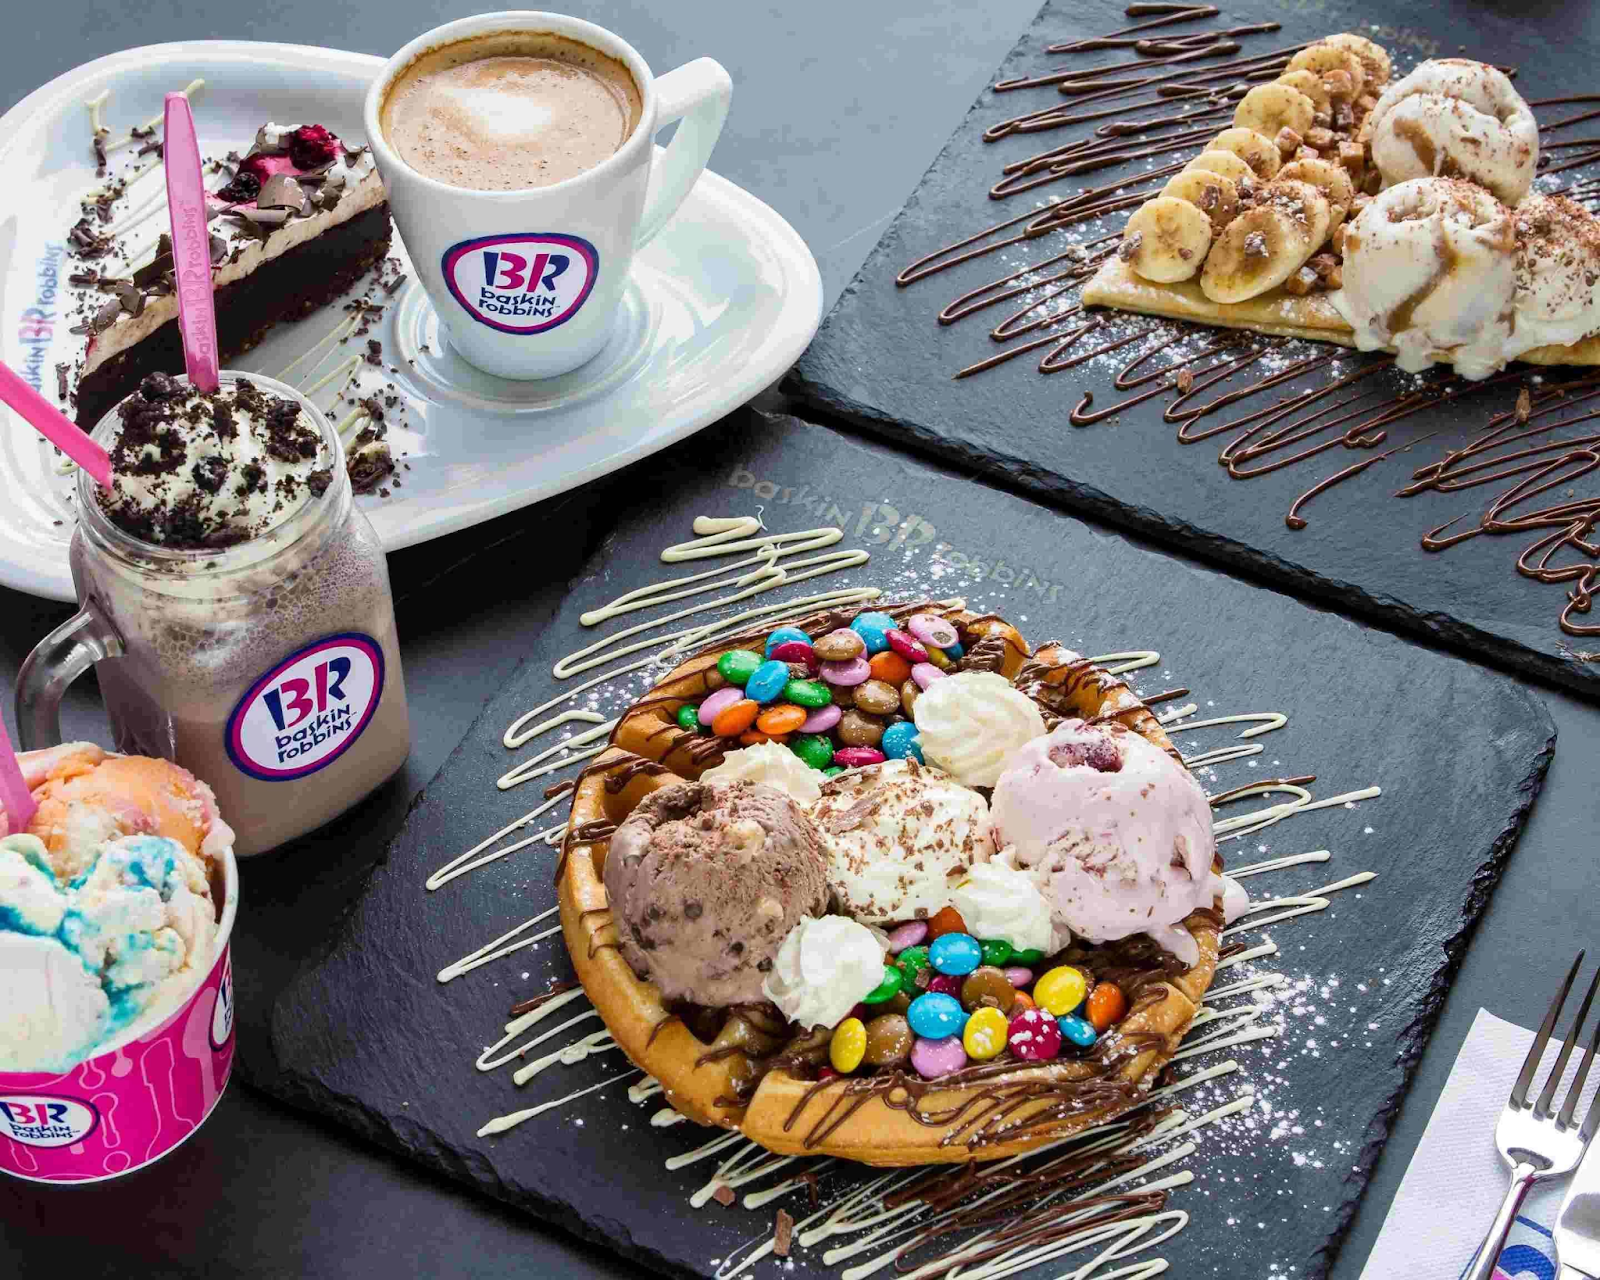 Baskin Robbins Marks Its Presence Online! Here Is All That You Need To Know